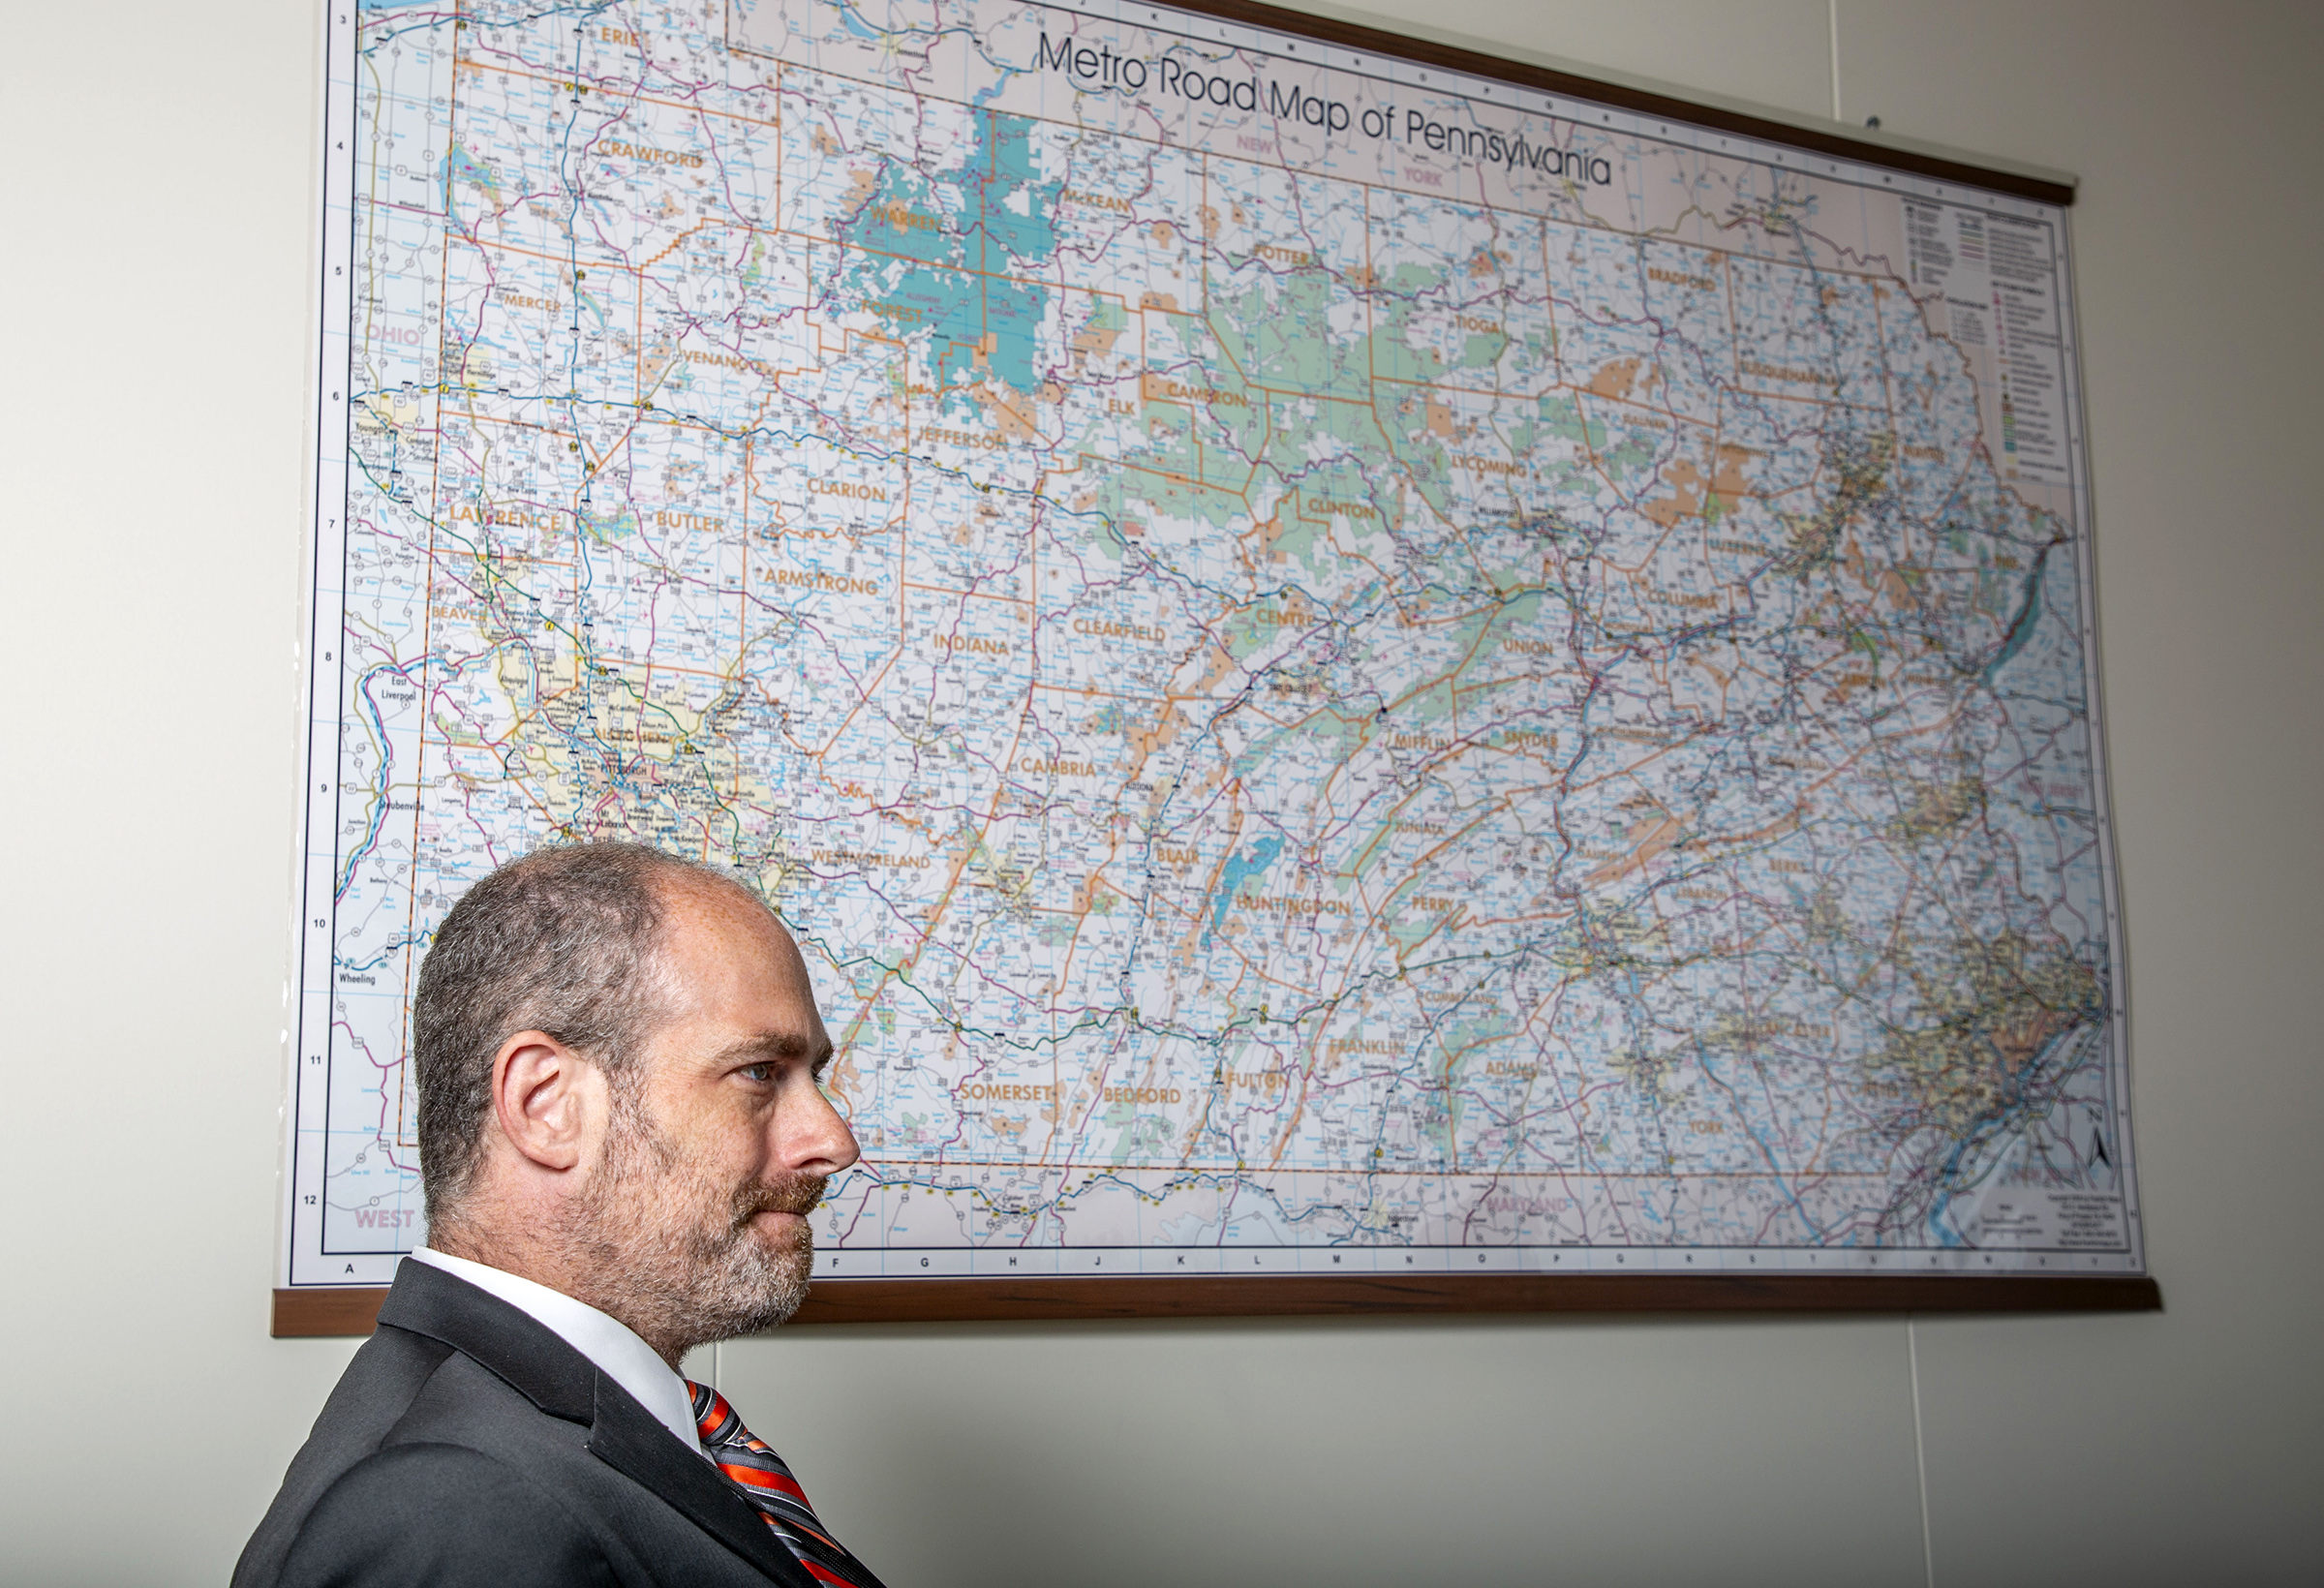 Nathan Byerly, OOR deputy director poses in front of a large map of Pennsylvania.